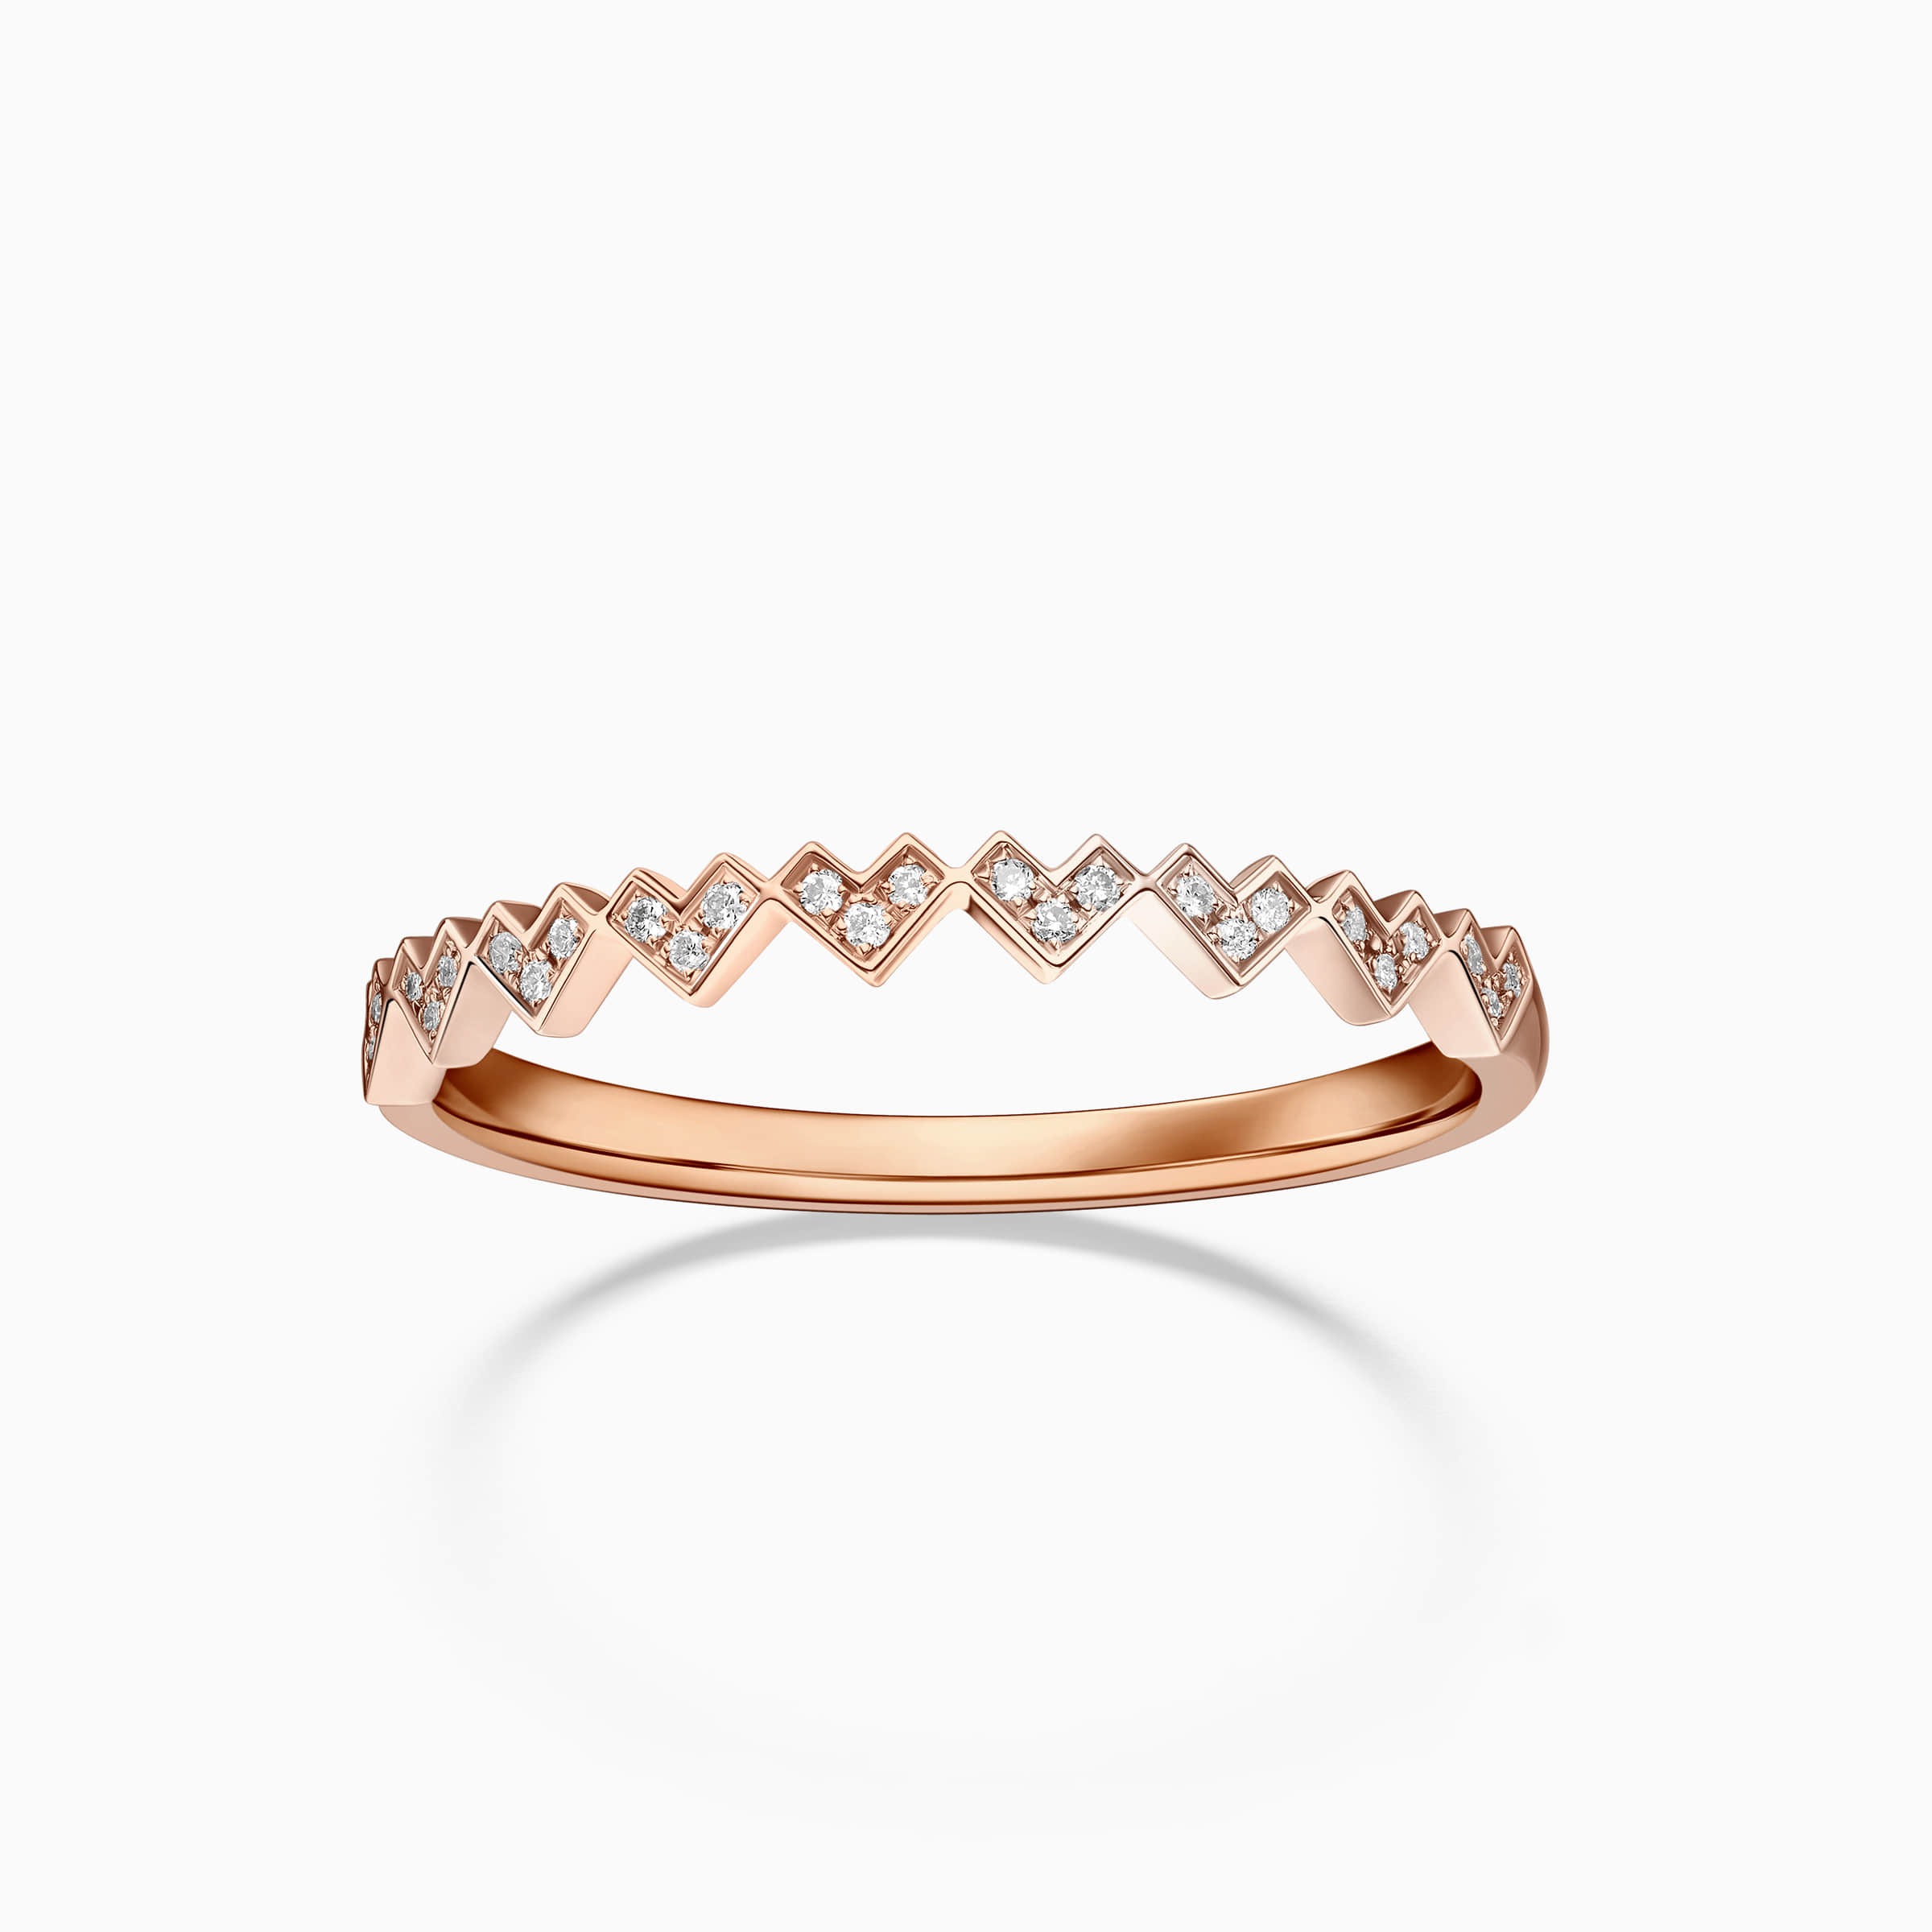 Darry Ring heart shaped diamond wedding ring in rose gold